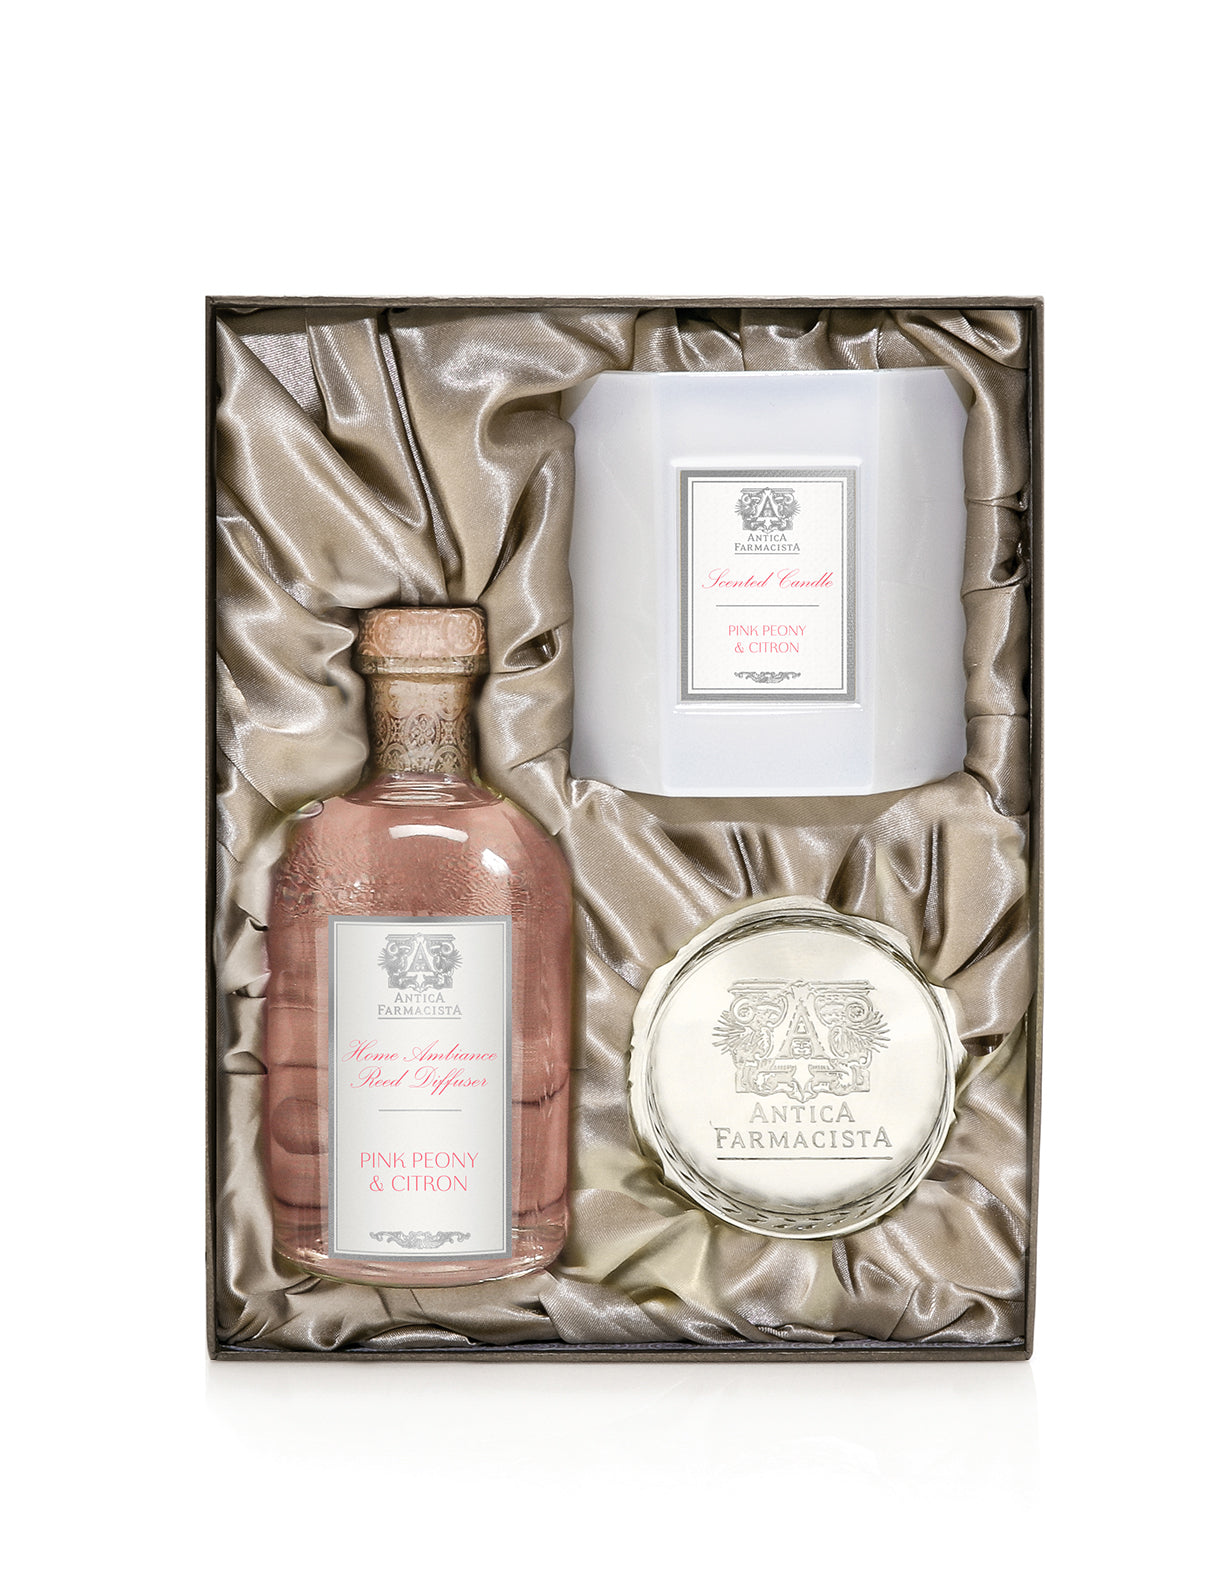 Nickel Home Ambiance Gift Set: Pink Peony & Citron